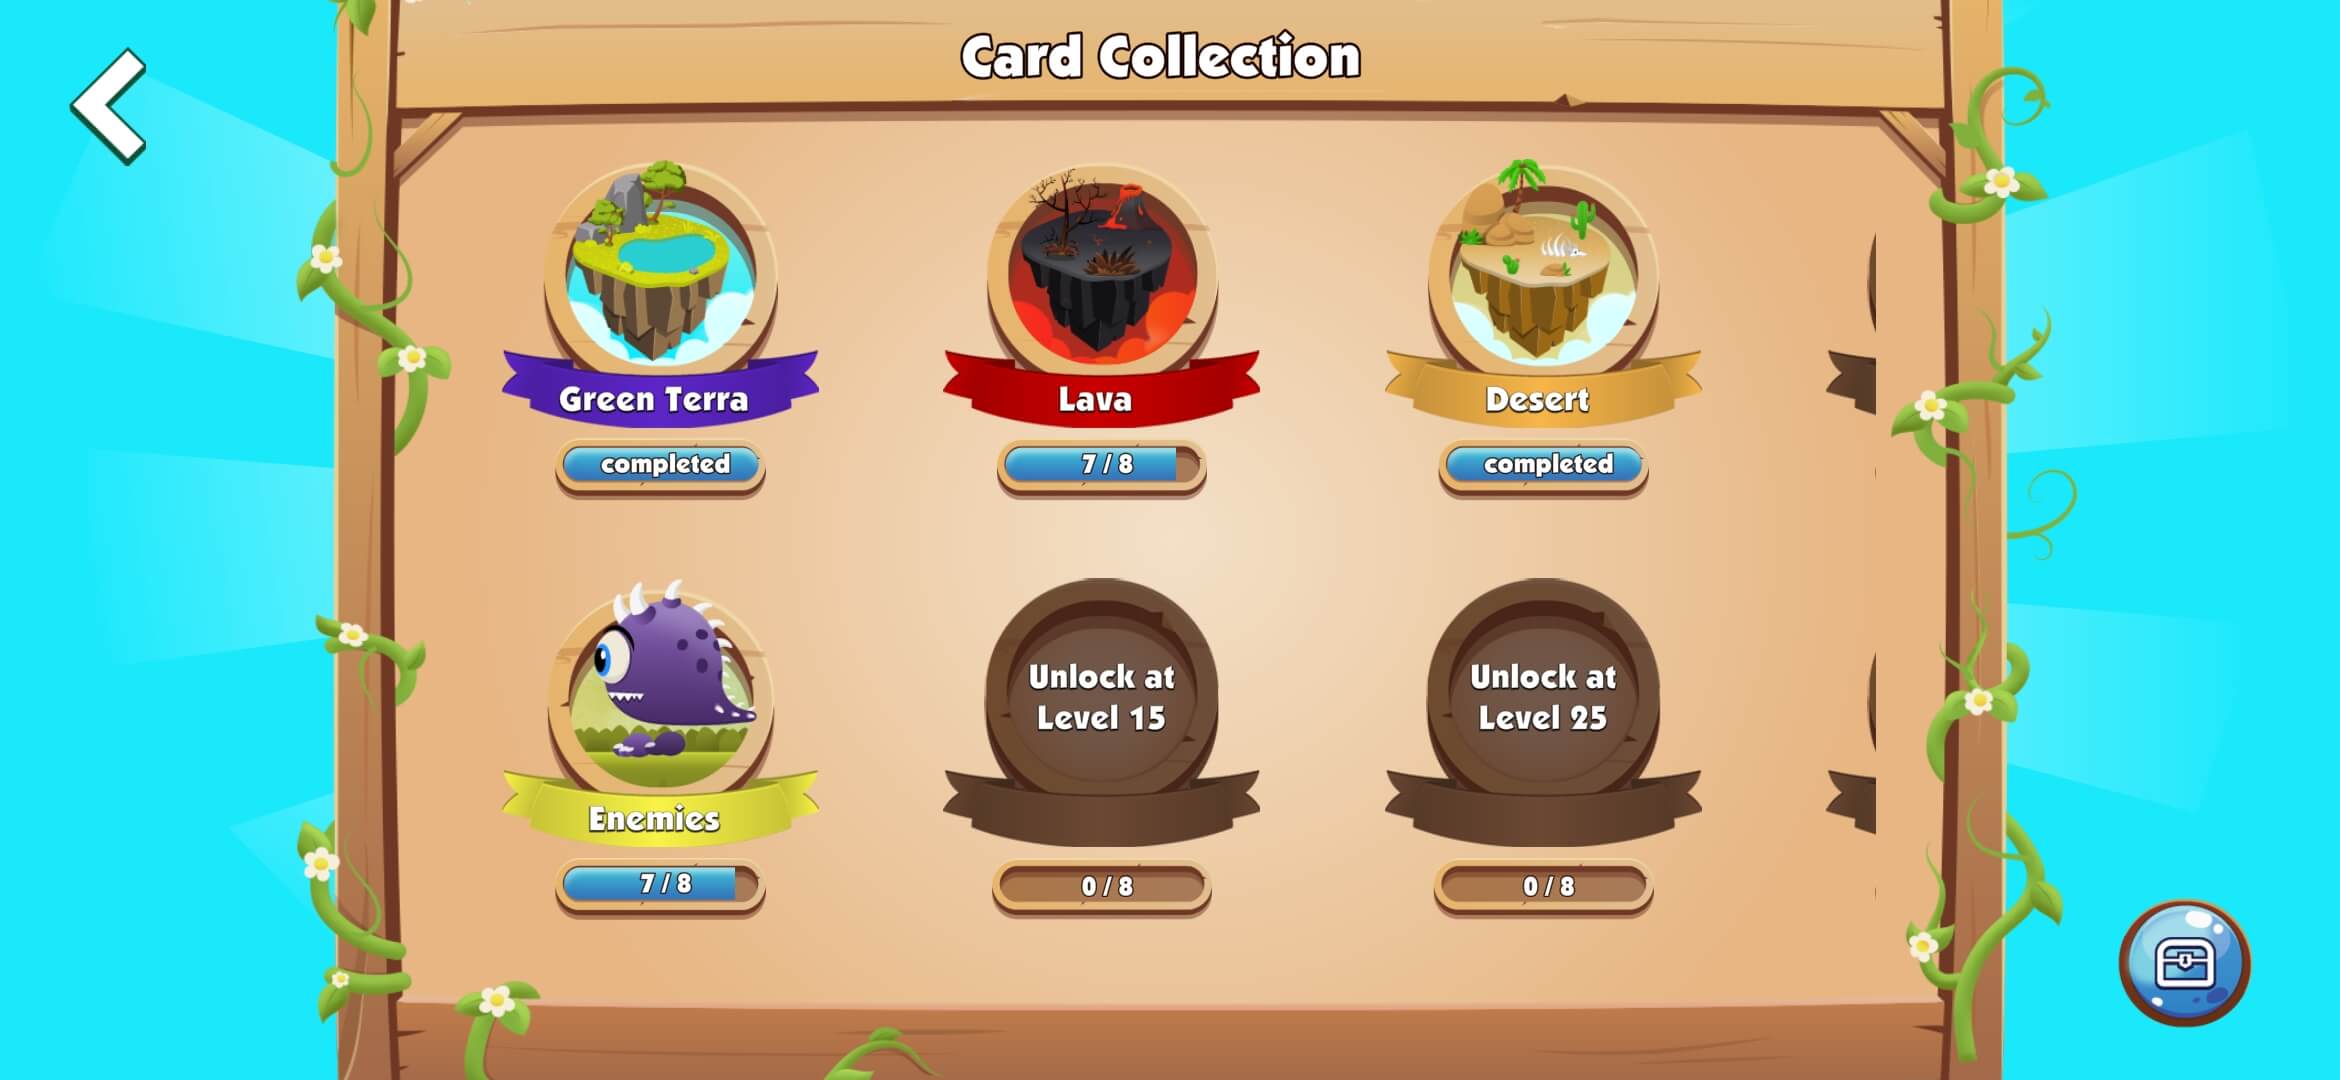 UI Cards Collection